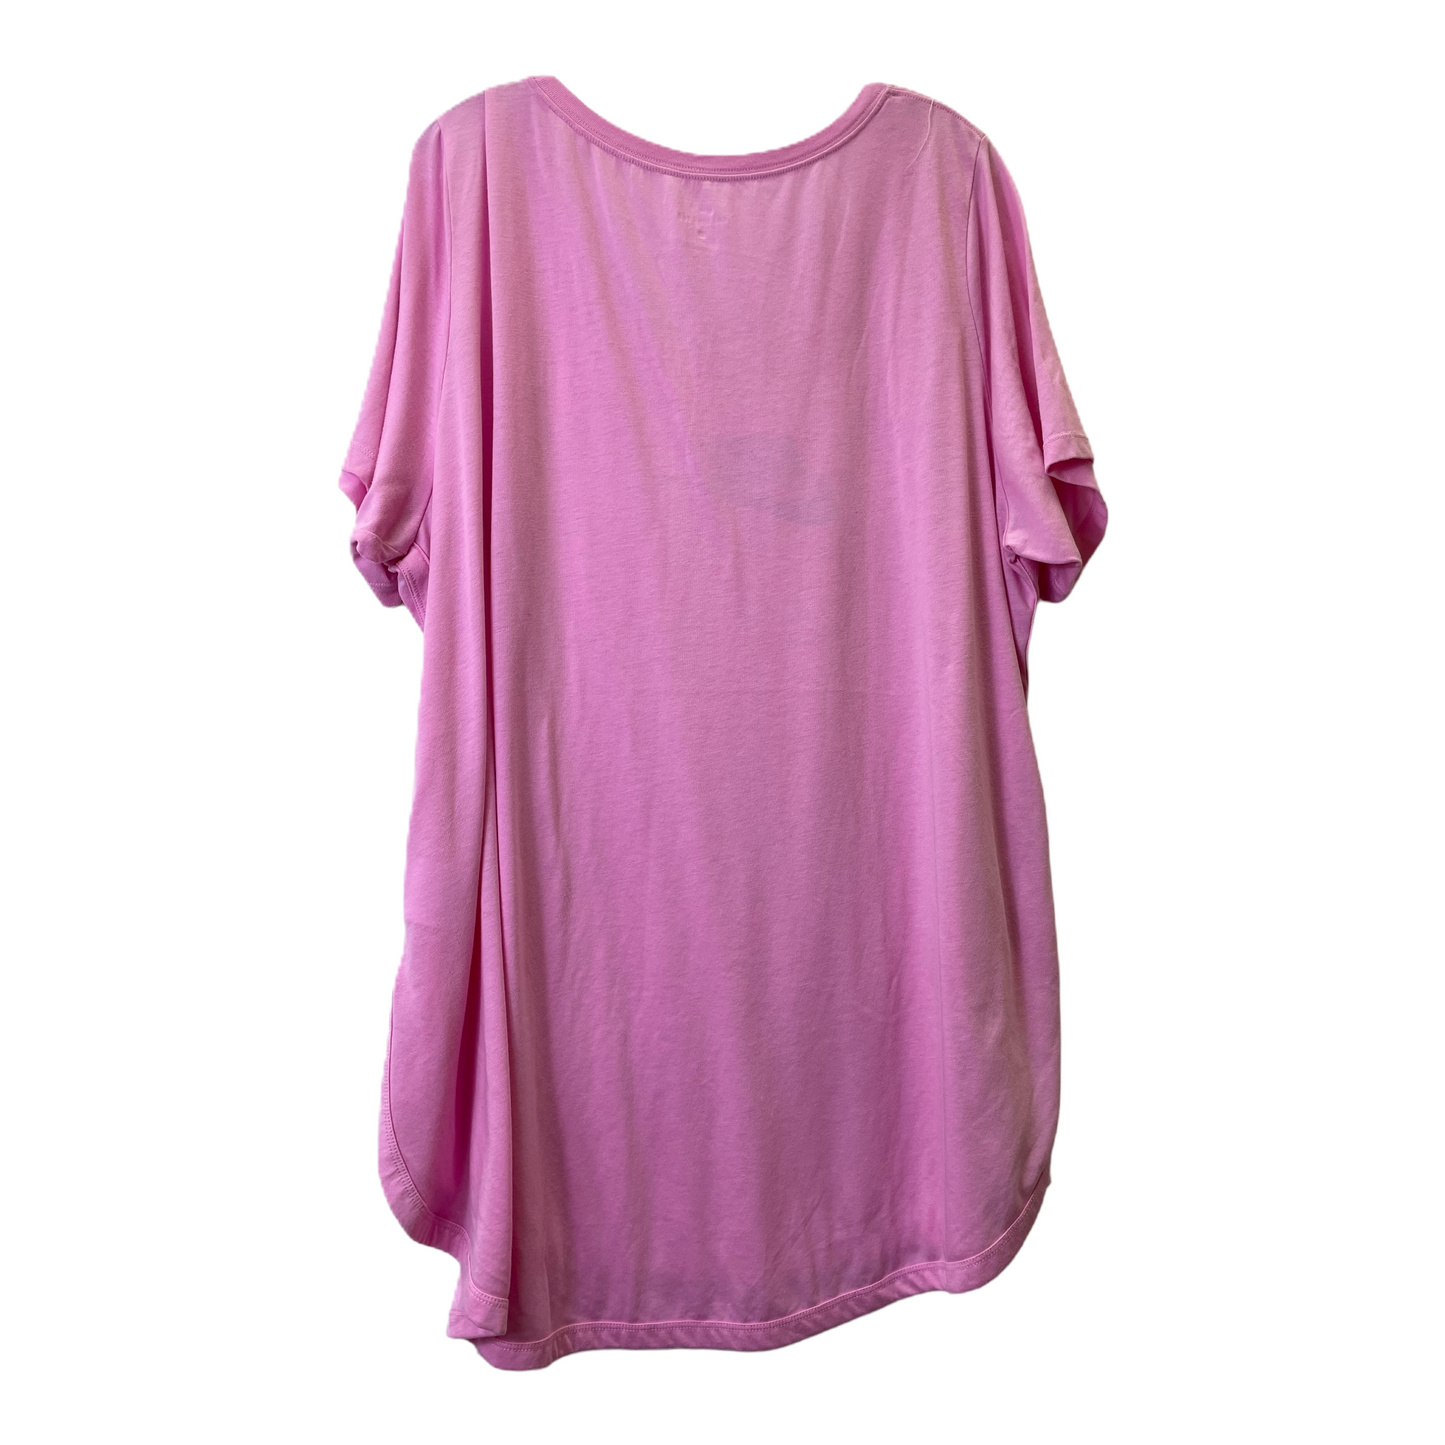 Pink Athletic Top Short Sleeve By Nike Apparel, Size: 2x